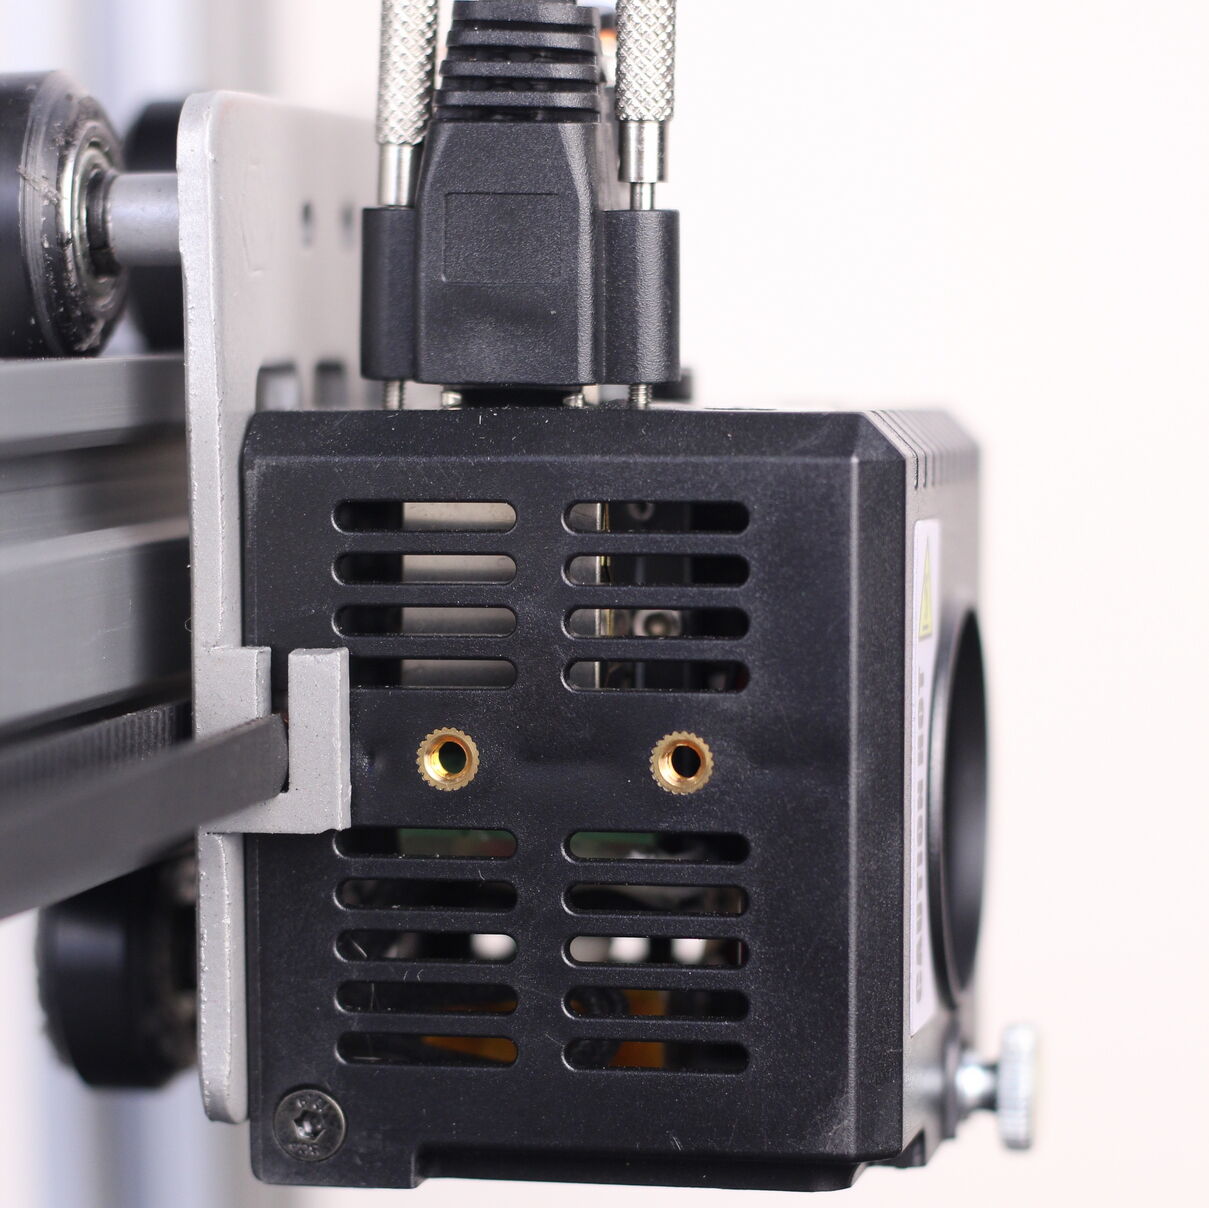 BLTouch mount edited | Wanhao Duplicator D12/230 Review: Dual-Color with Single Nozzle